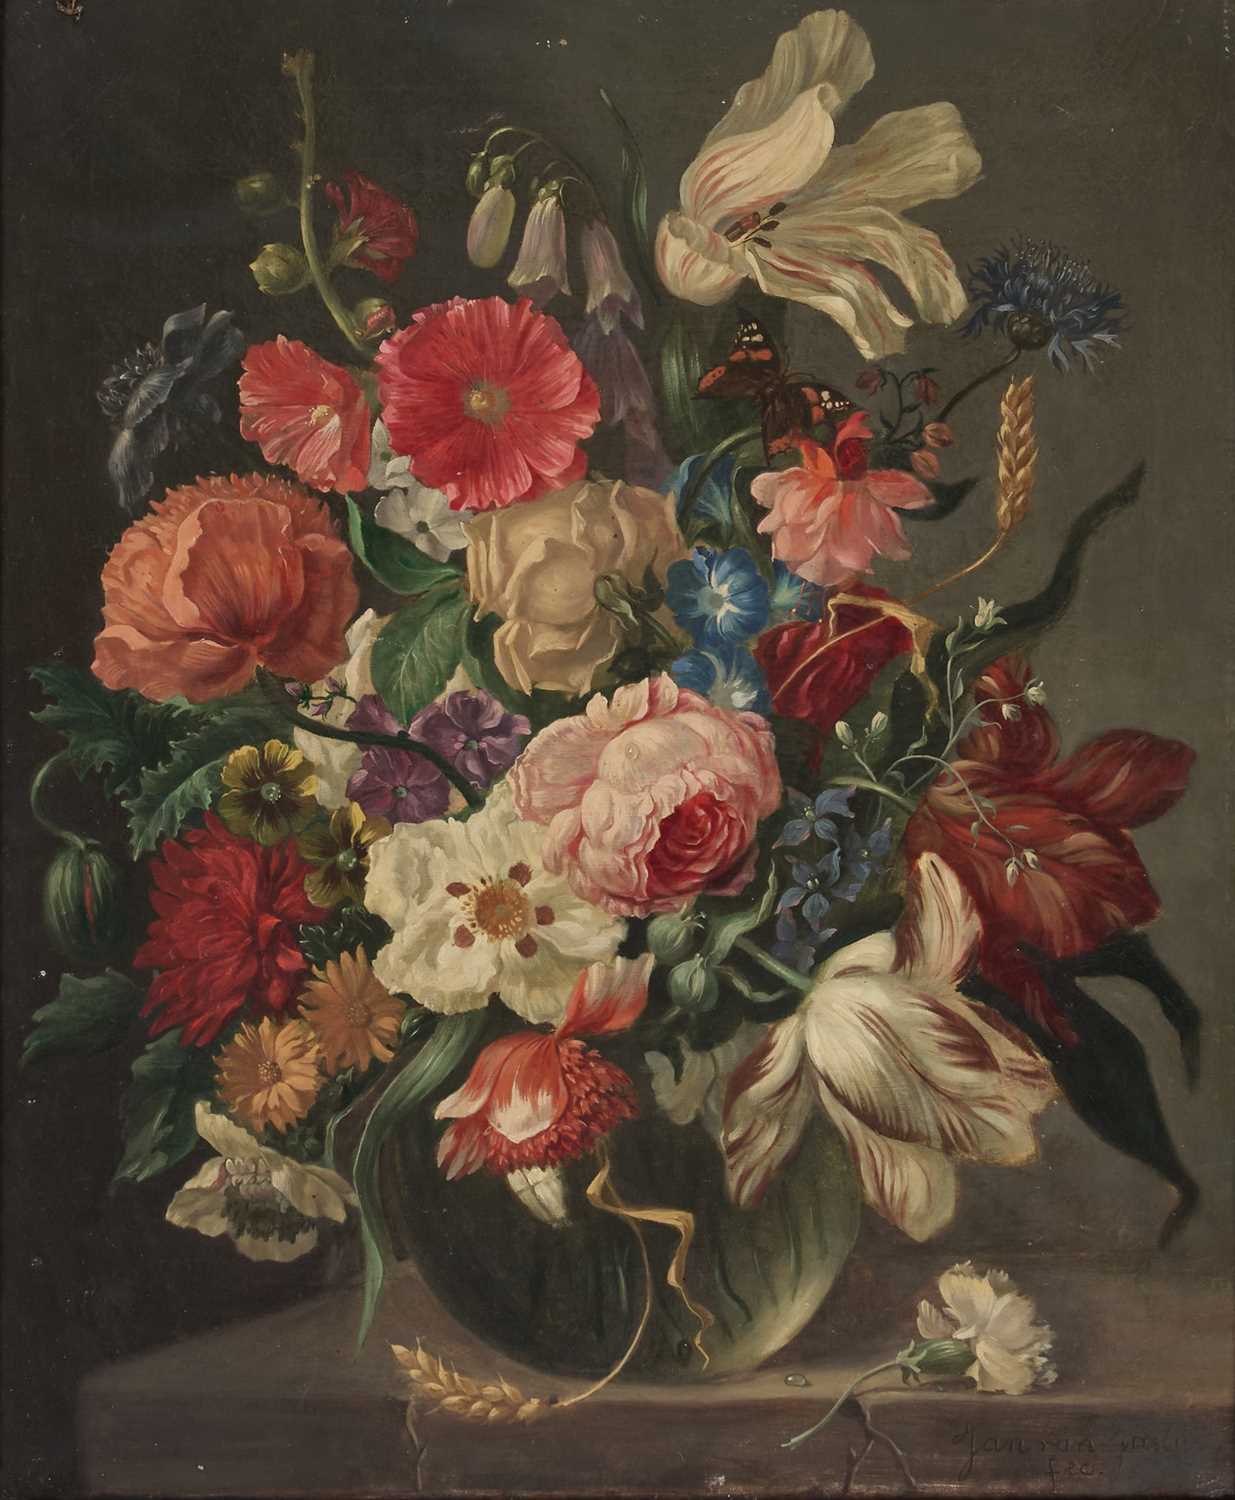 19TH CENTURY EUROPEAN SCHOOL IN THE 17TH CENTURY STYLE STILL LIFE OF FLOWERS IN A VASE